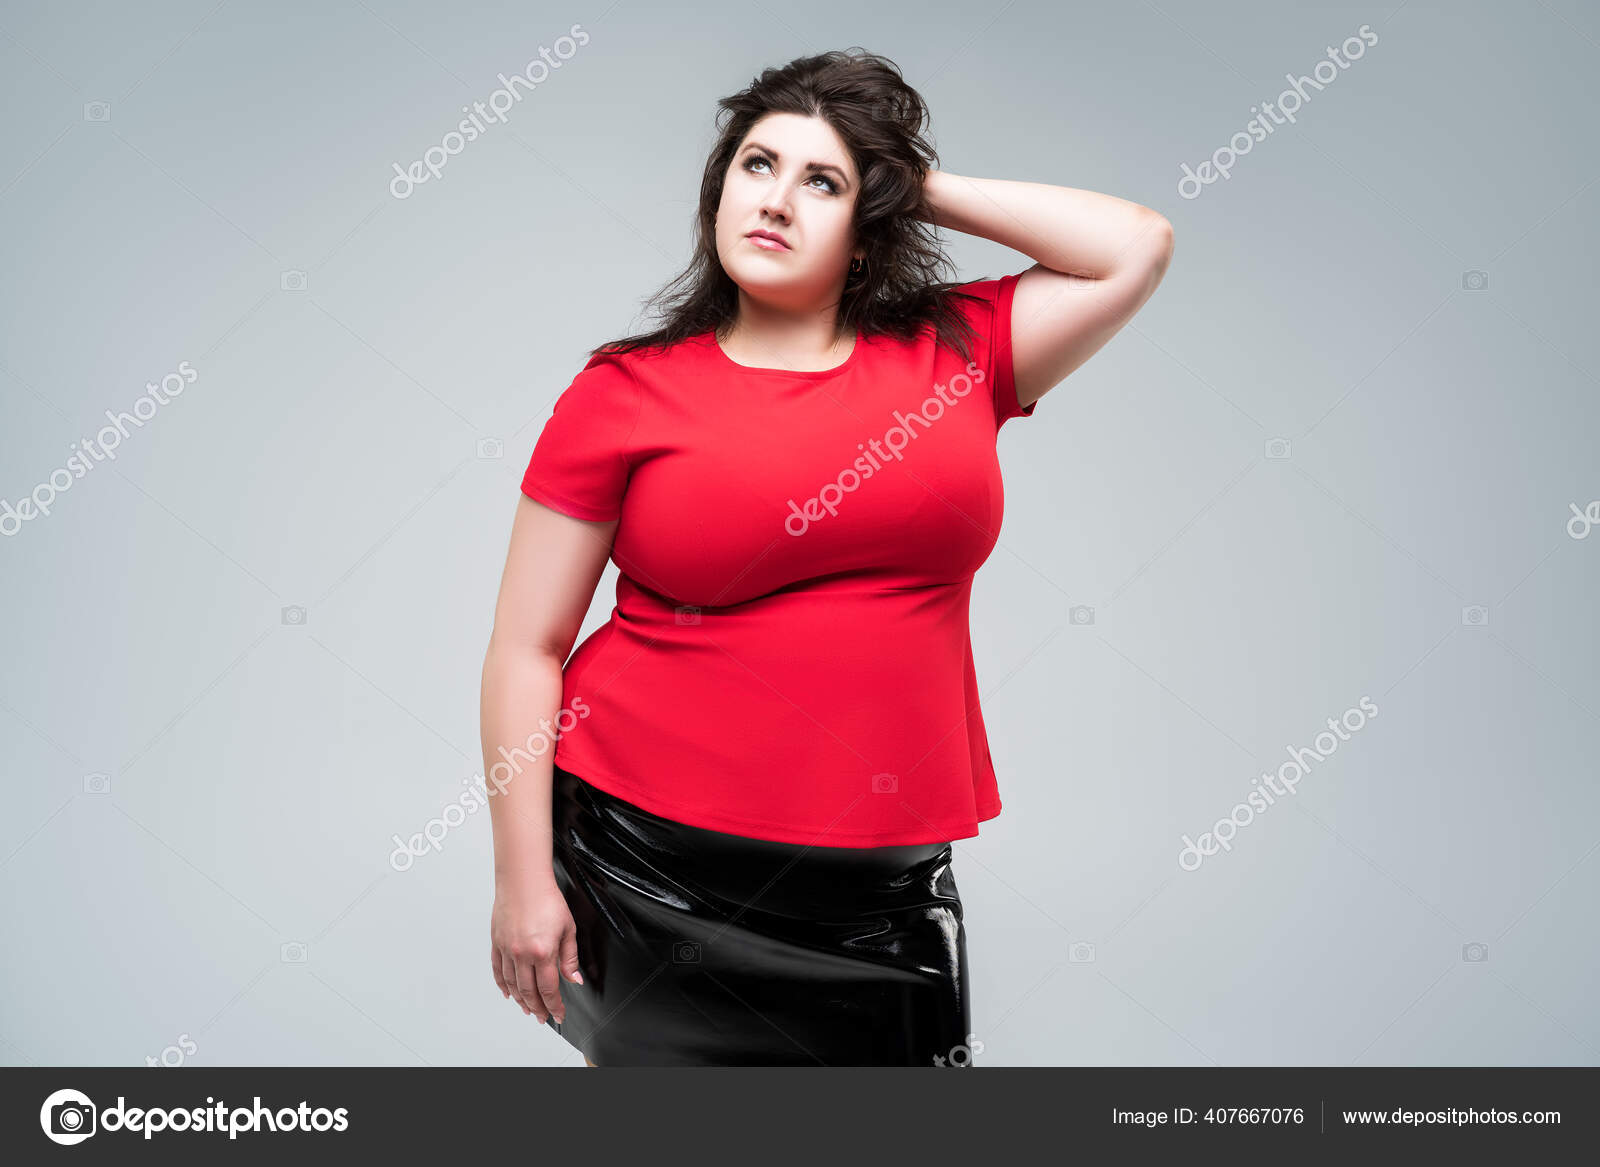 Size Fashion Model Red Blouse Black Skirt Fat Woman Gray Stock Photo by 407667076